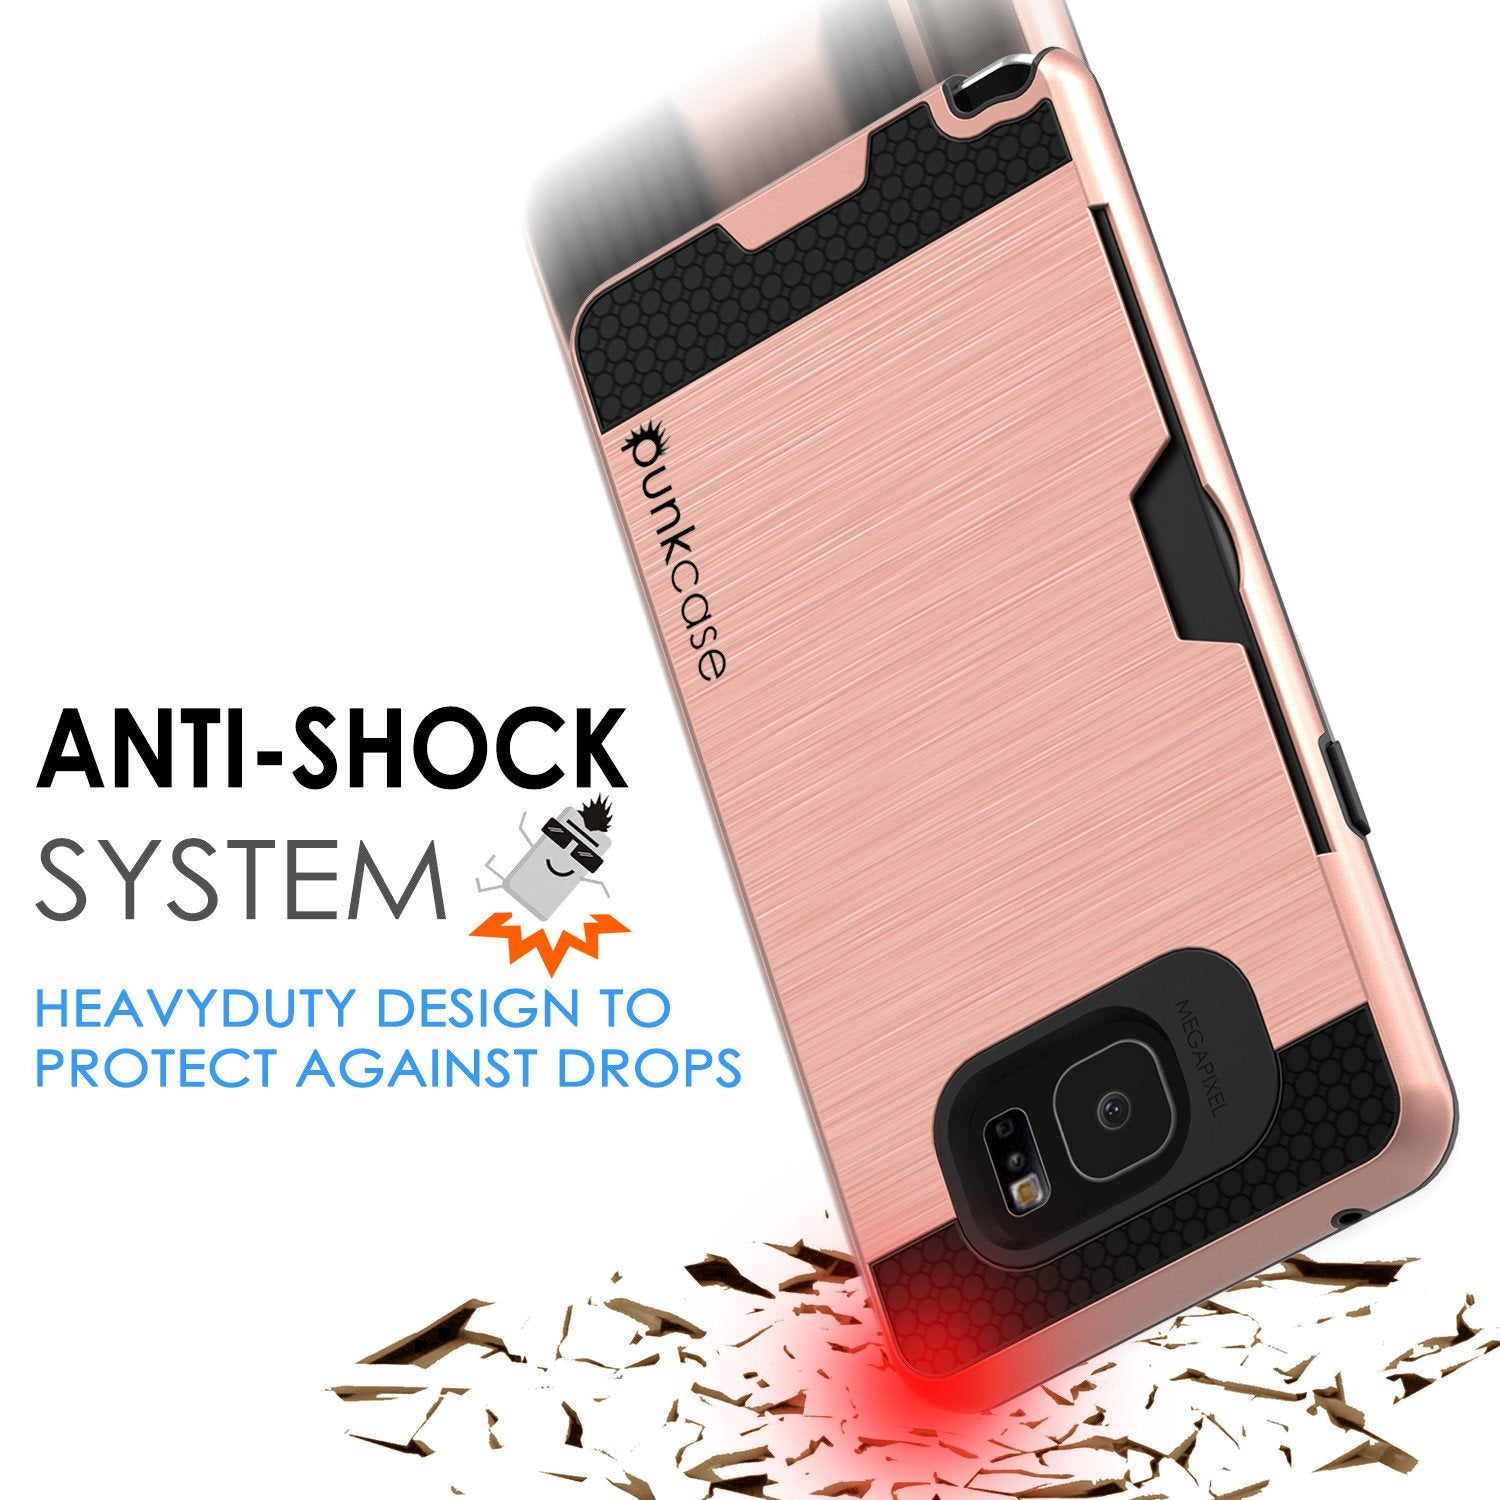 Galaxy Note 5 Case PunkCase SLOT Rose Series Slim Armor Soft Cover Case w/ Tempered Glass - PunkCase NZ